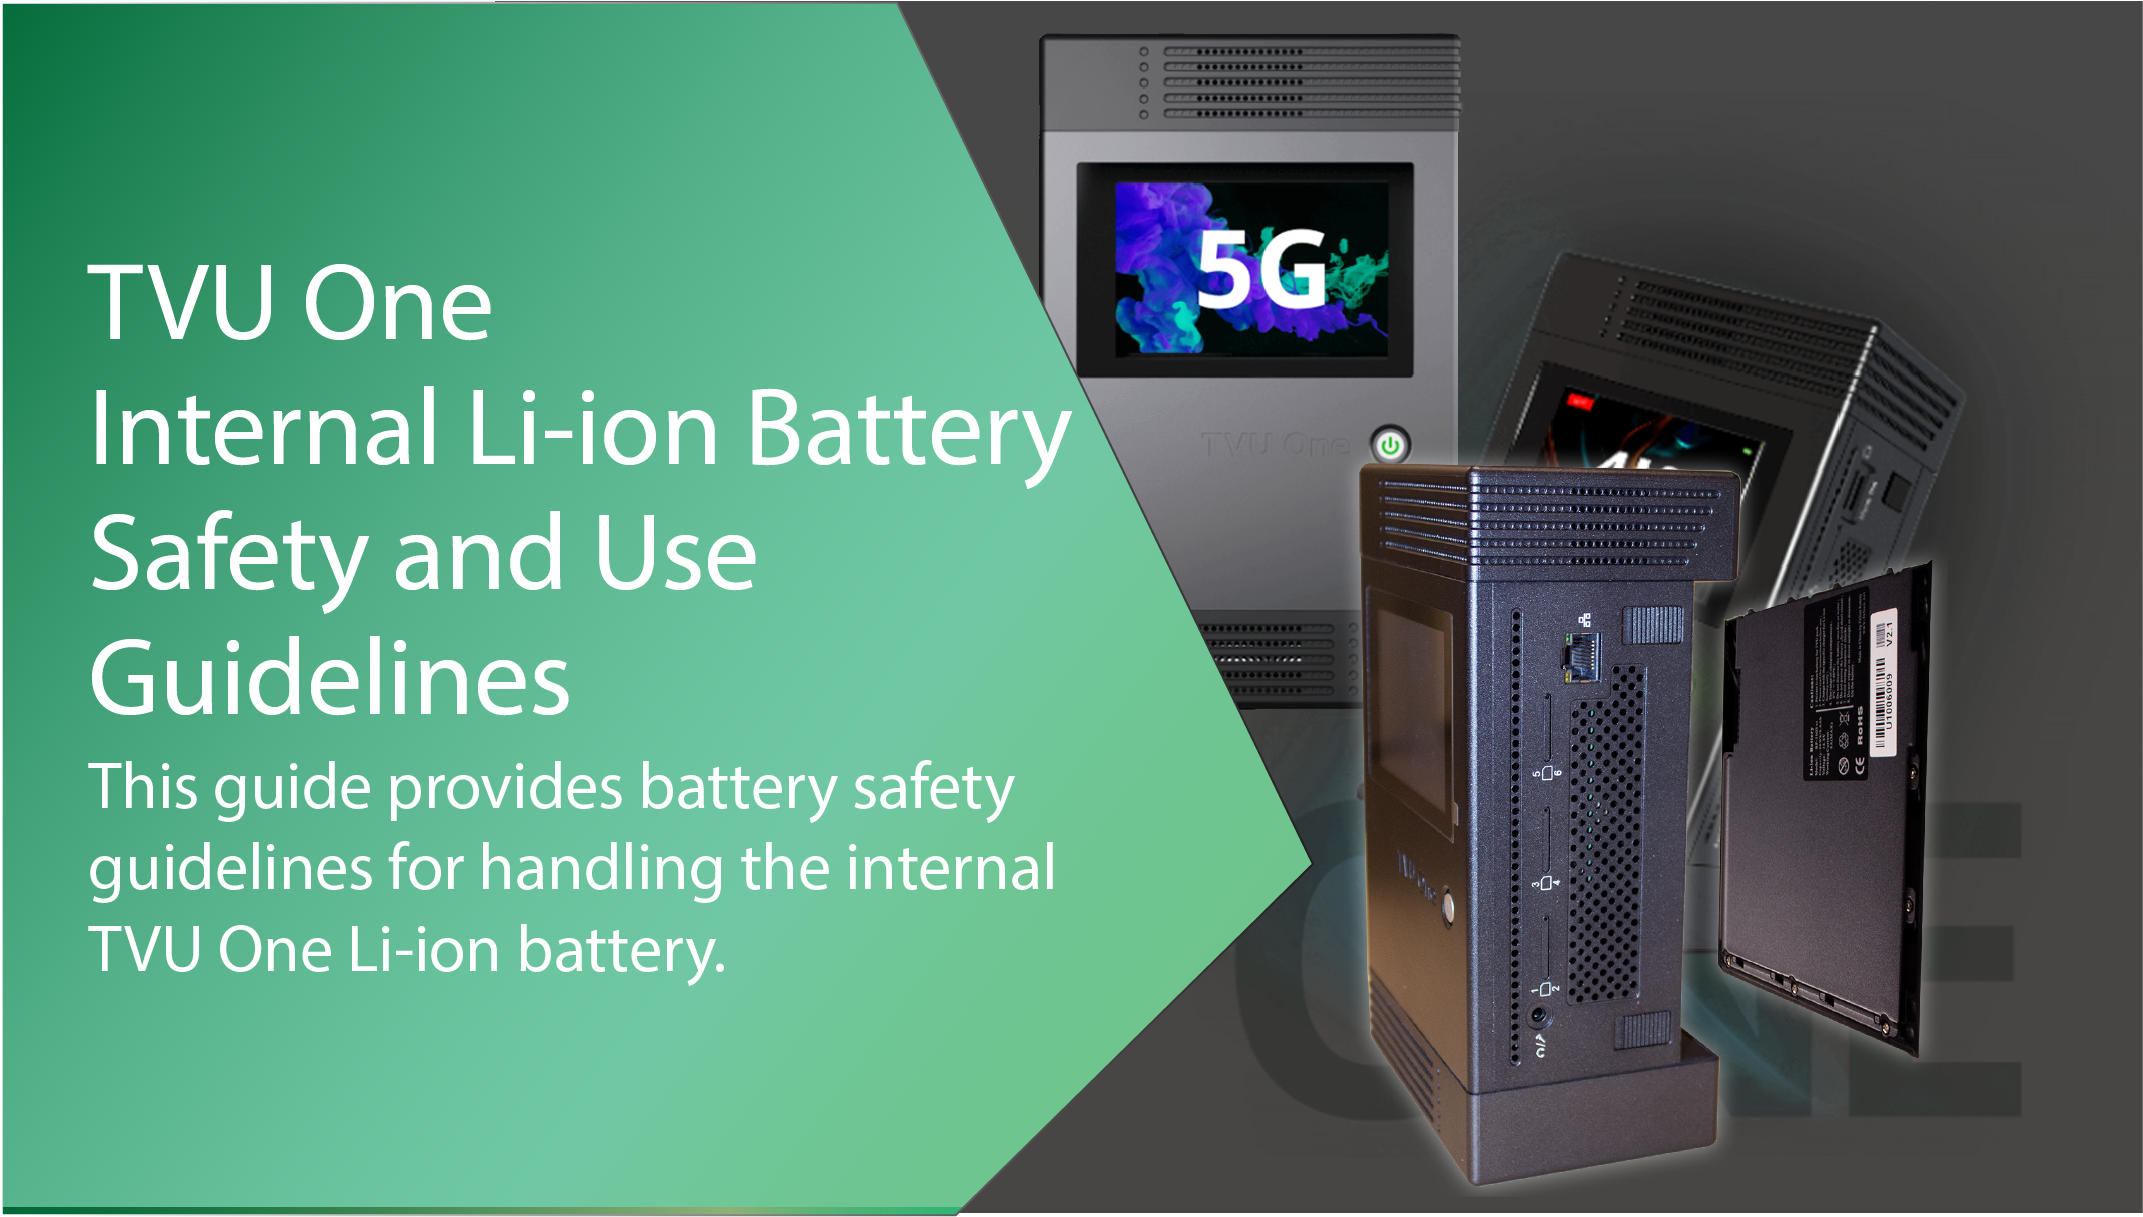 TVU One Li-ion battery safety guidelines Featured image